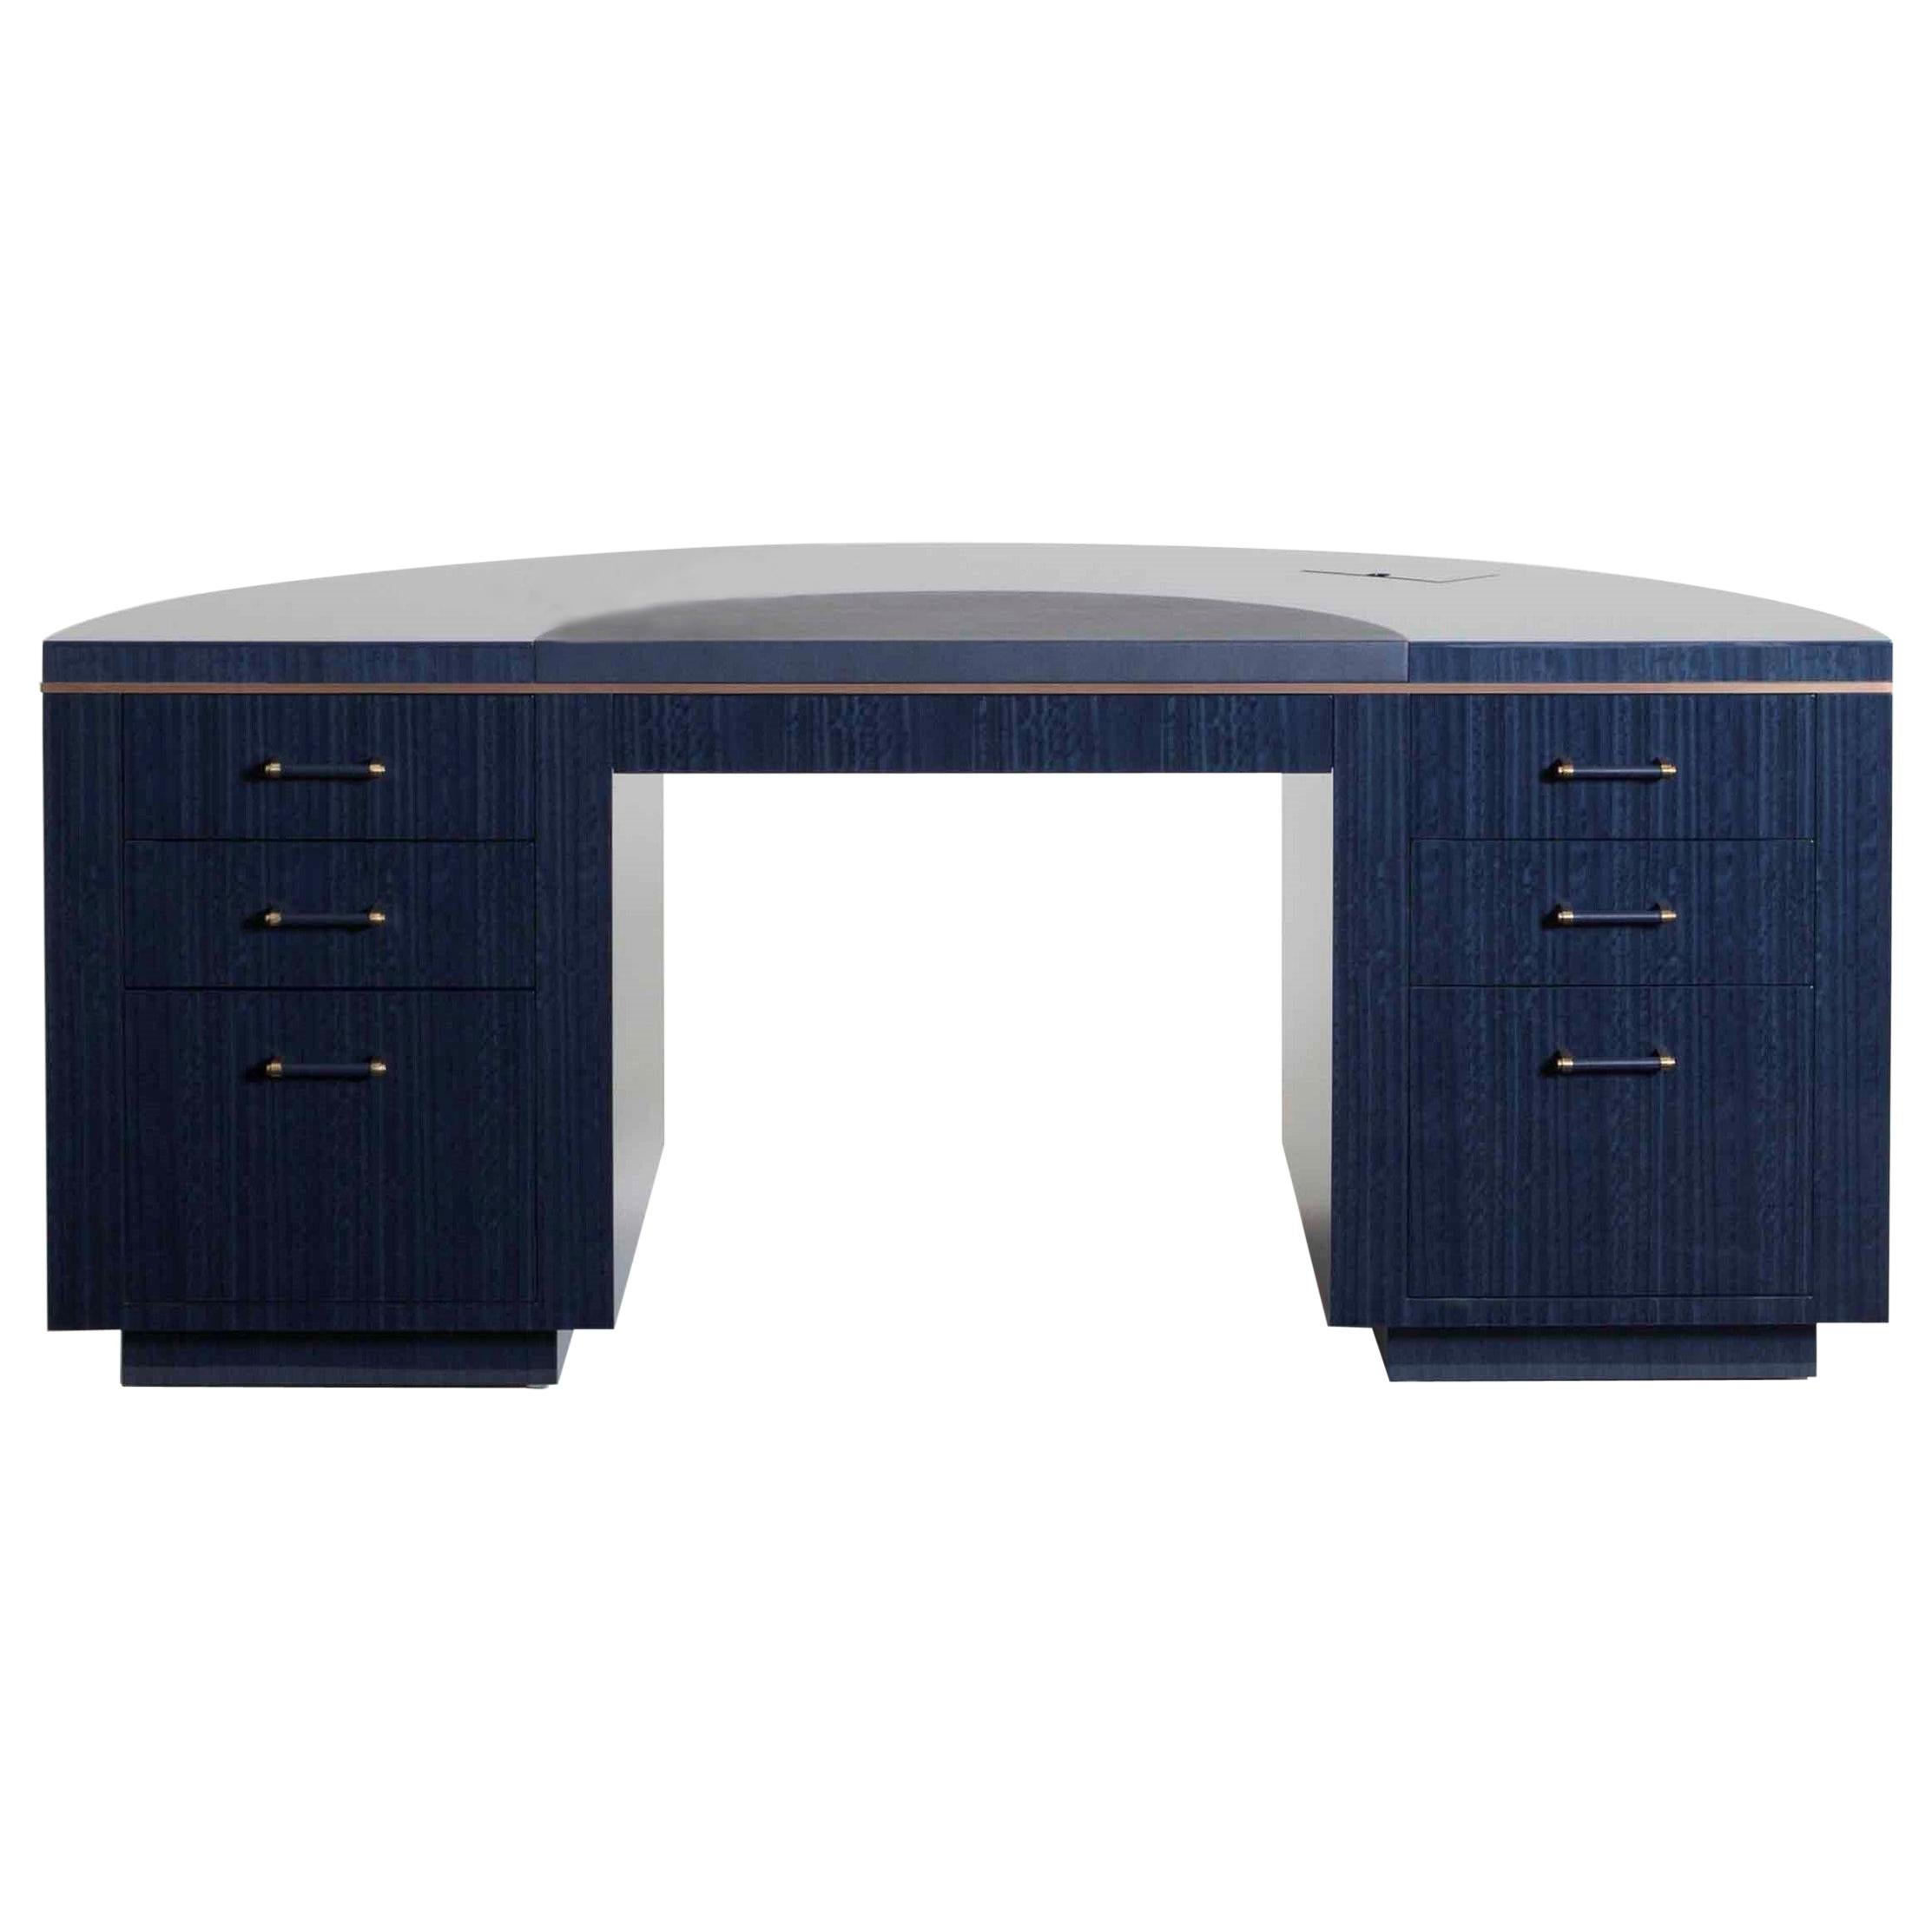 Davidson's Art Deco Style "Lunar" Writing Desk, in a Figured Blue Anegre Timber